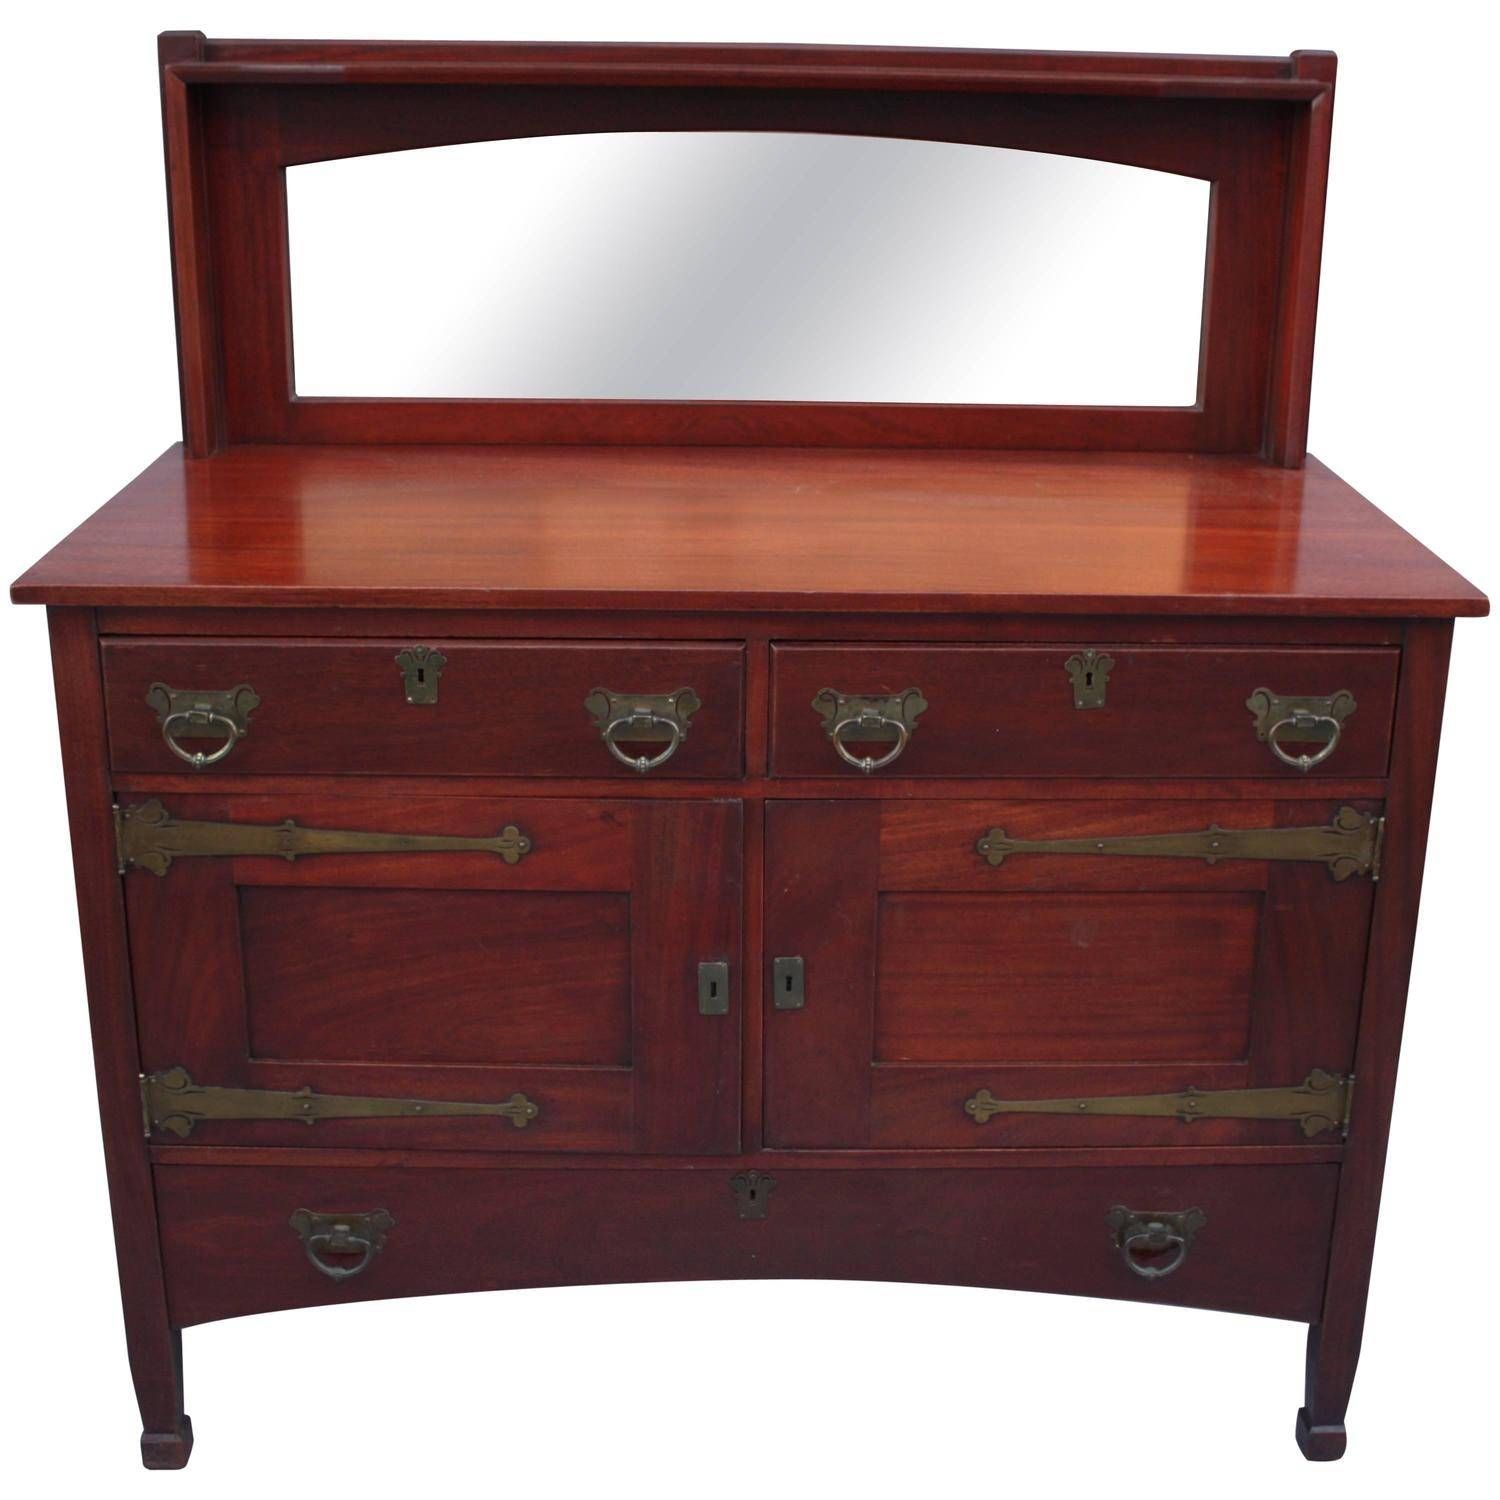 Mahogany Arts And Crafts, Art Nouveau Sideboard With Mirror For In Sideboards With Mirror (View 21 of 30)